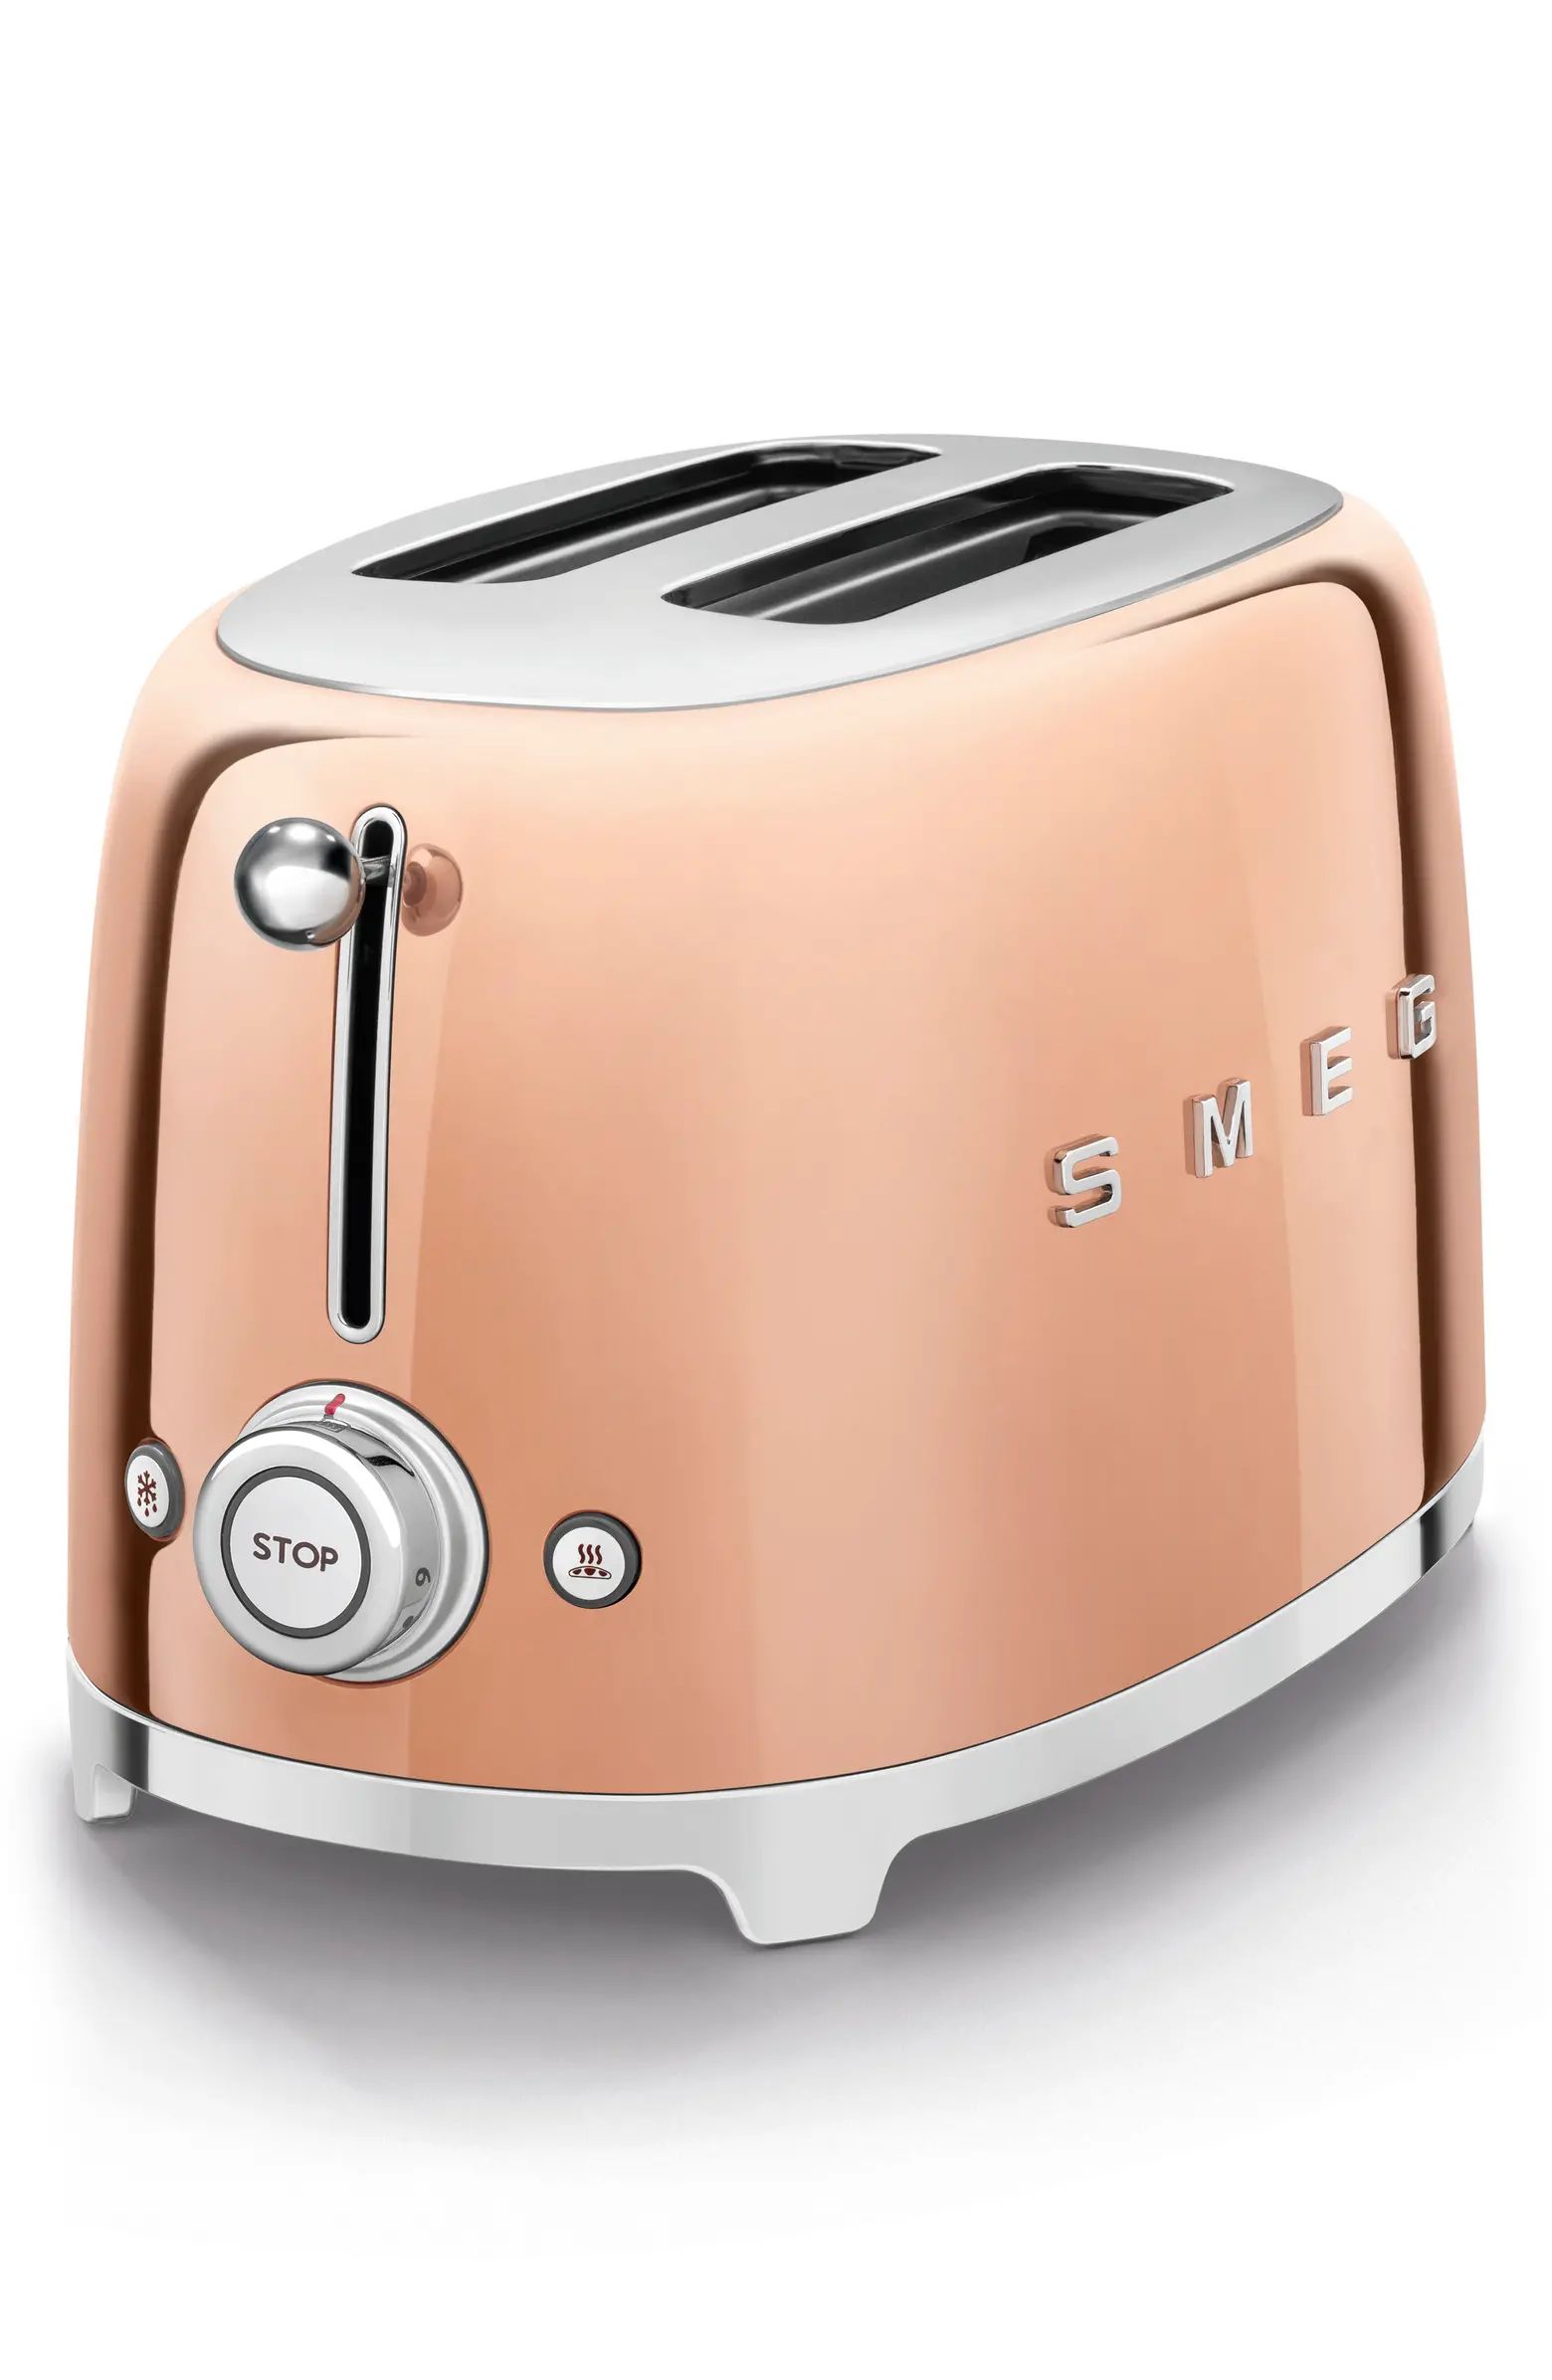 50s Retro Style Two-Slice Toaster | Nordstrom